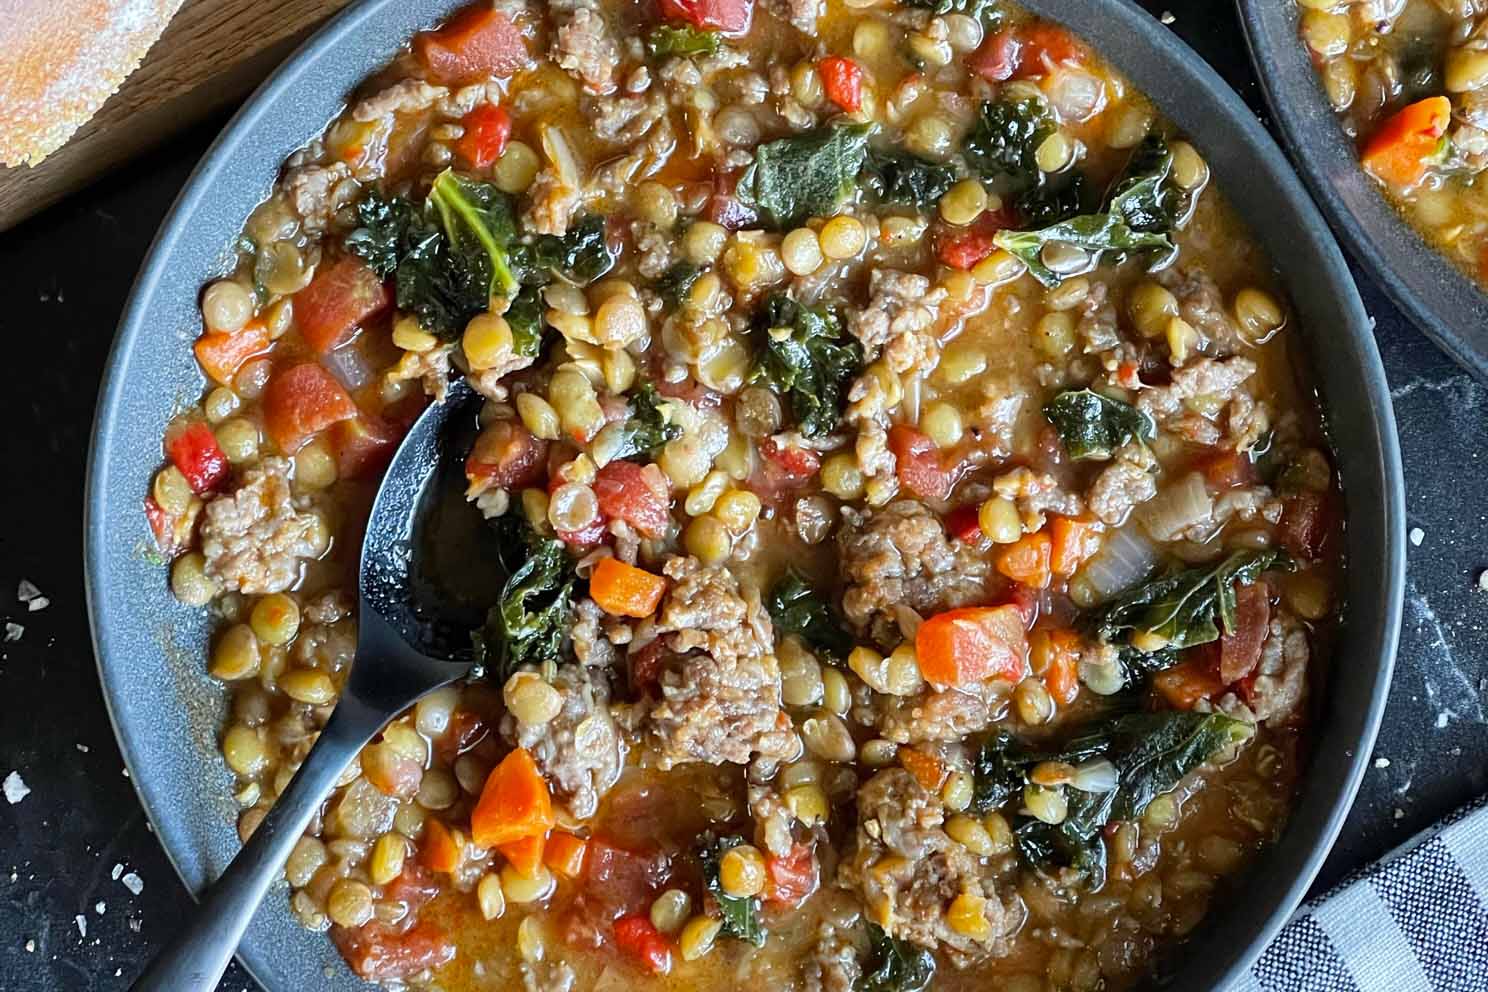 Lentil soup with sausage and spinach in a dark bowl